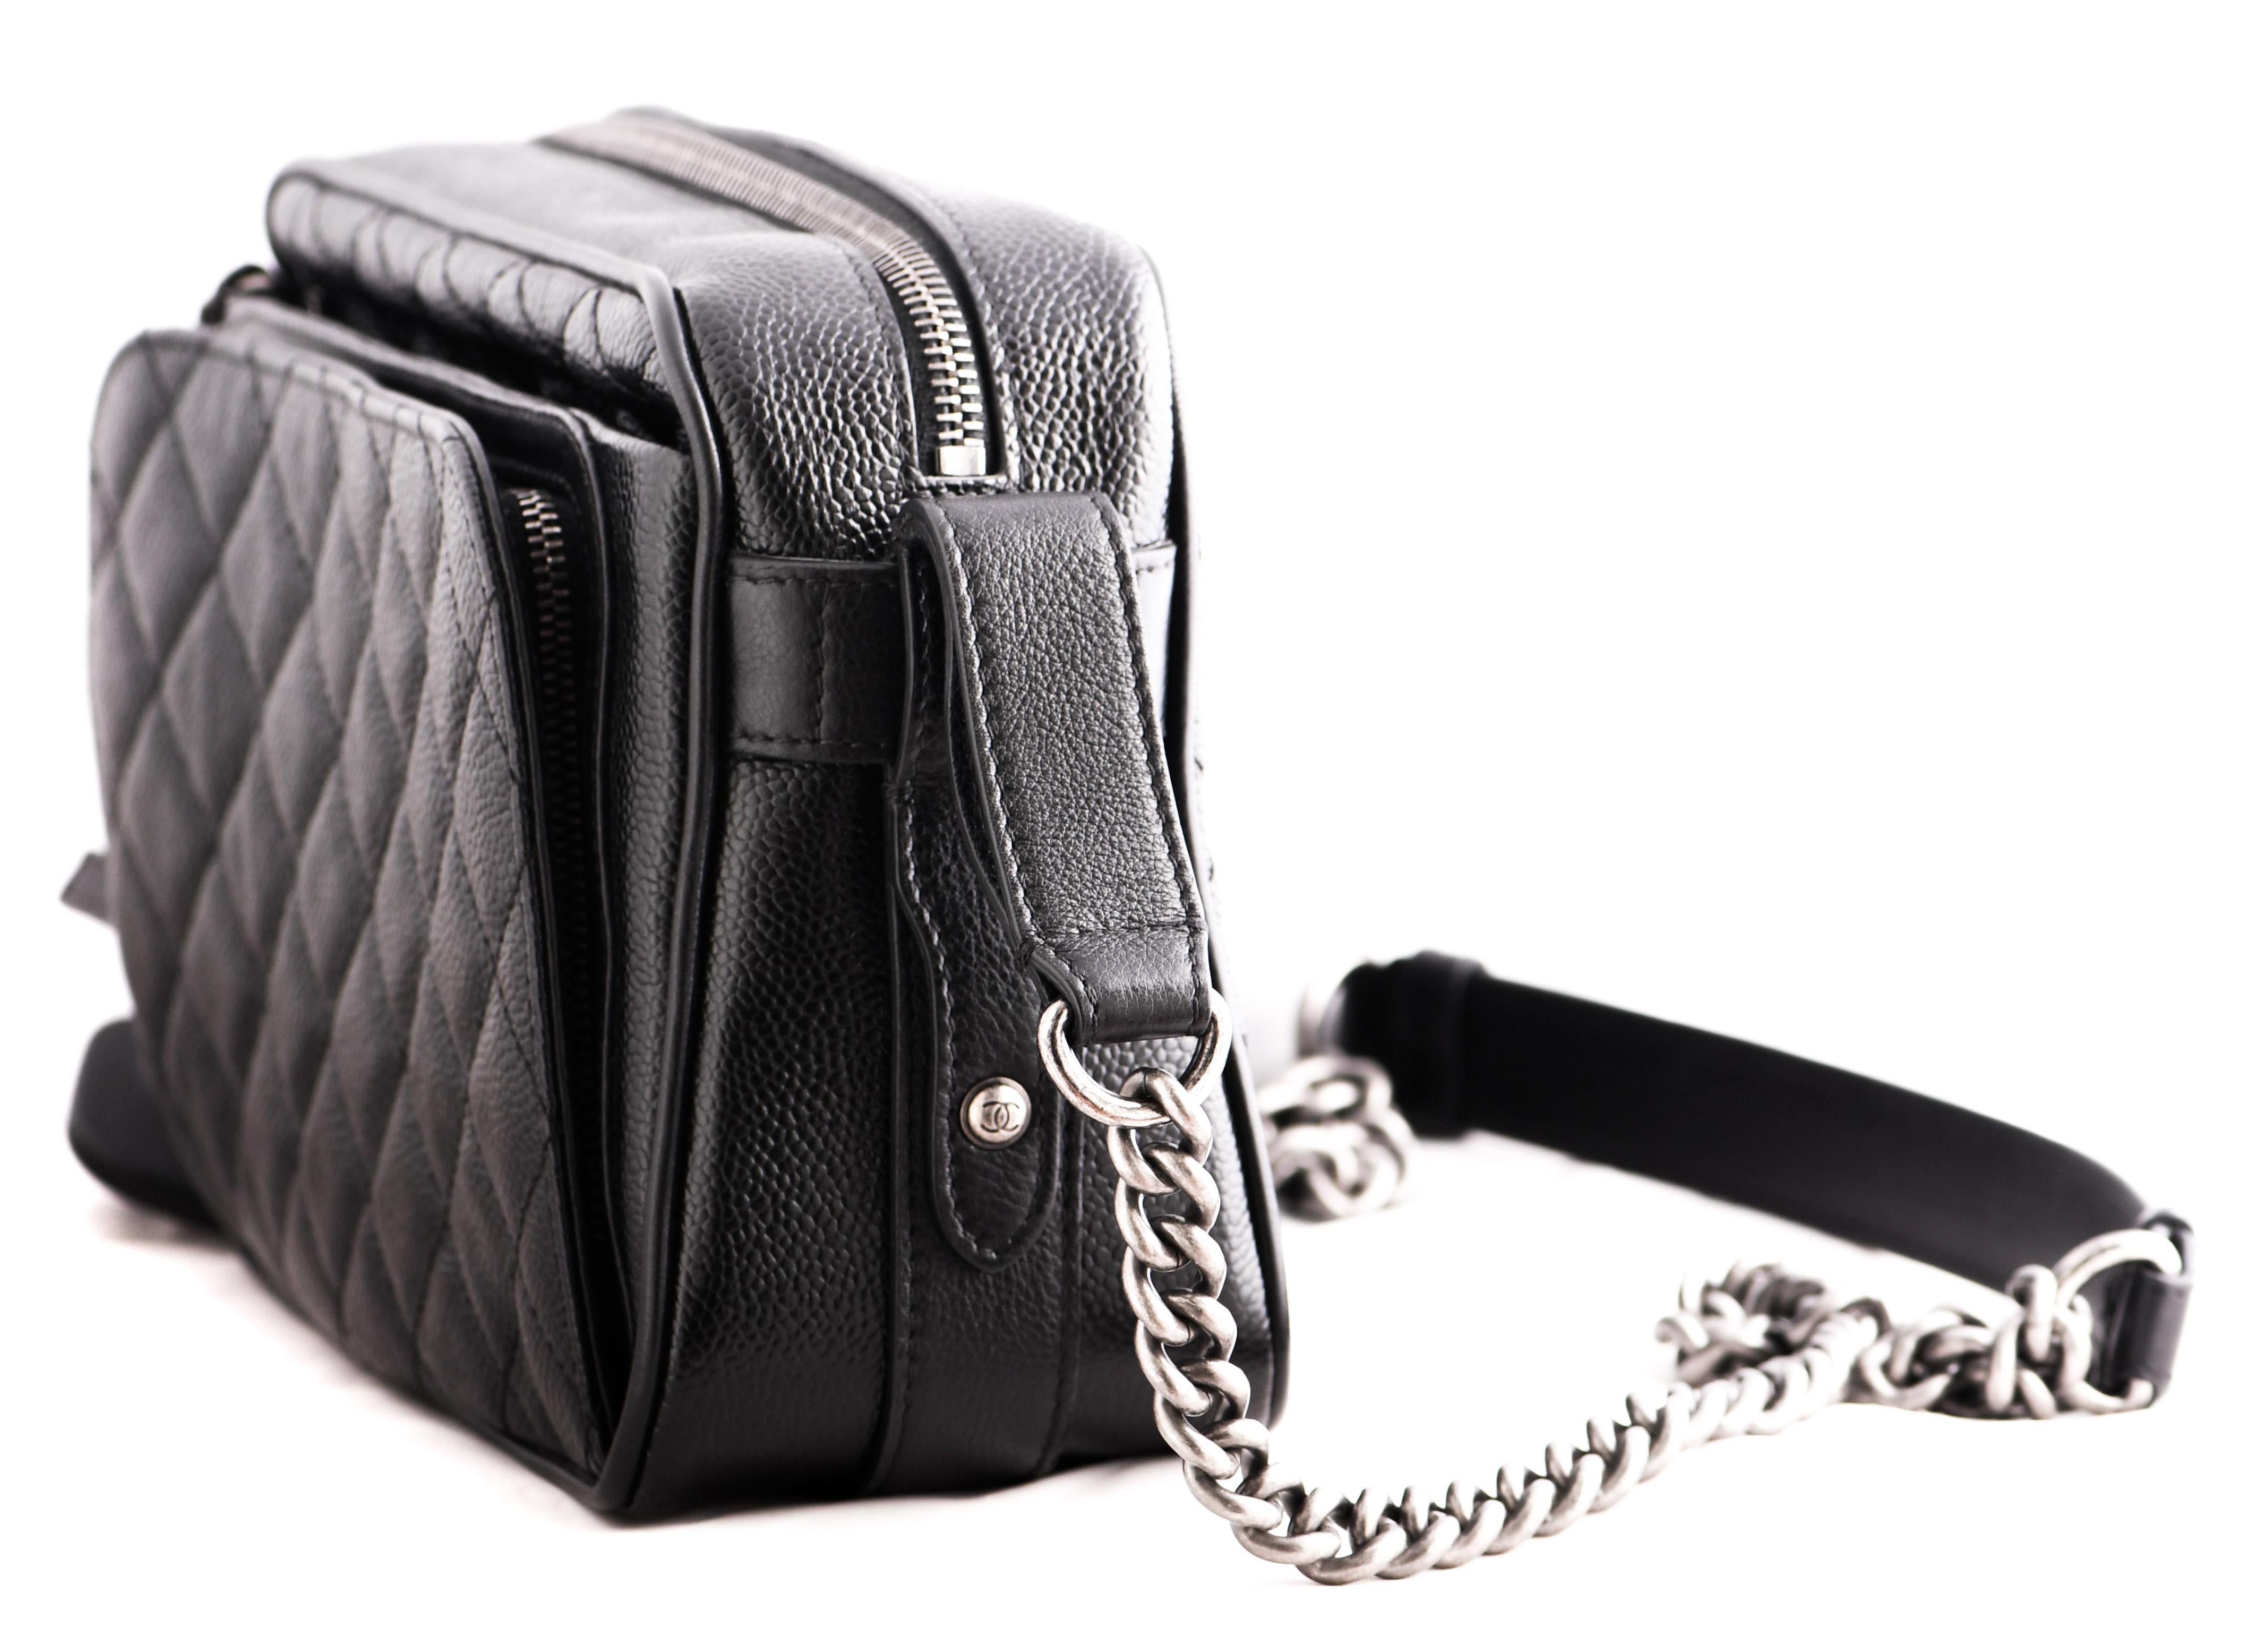 Chanel  chic Affinity camera shoulder bag is finely crafted of luxurious diamond-quilted caviar leather in black. The bag features a leather threaded ruthenium chain shoulder strap, a flat exterior pocket and two front zipper pocket one featuring a